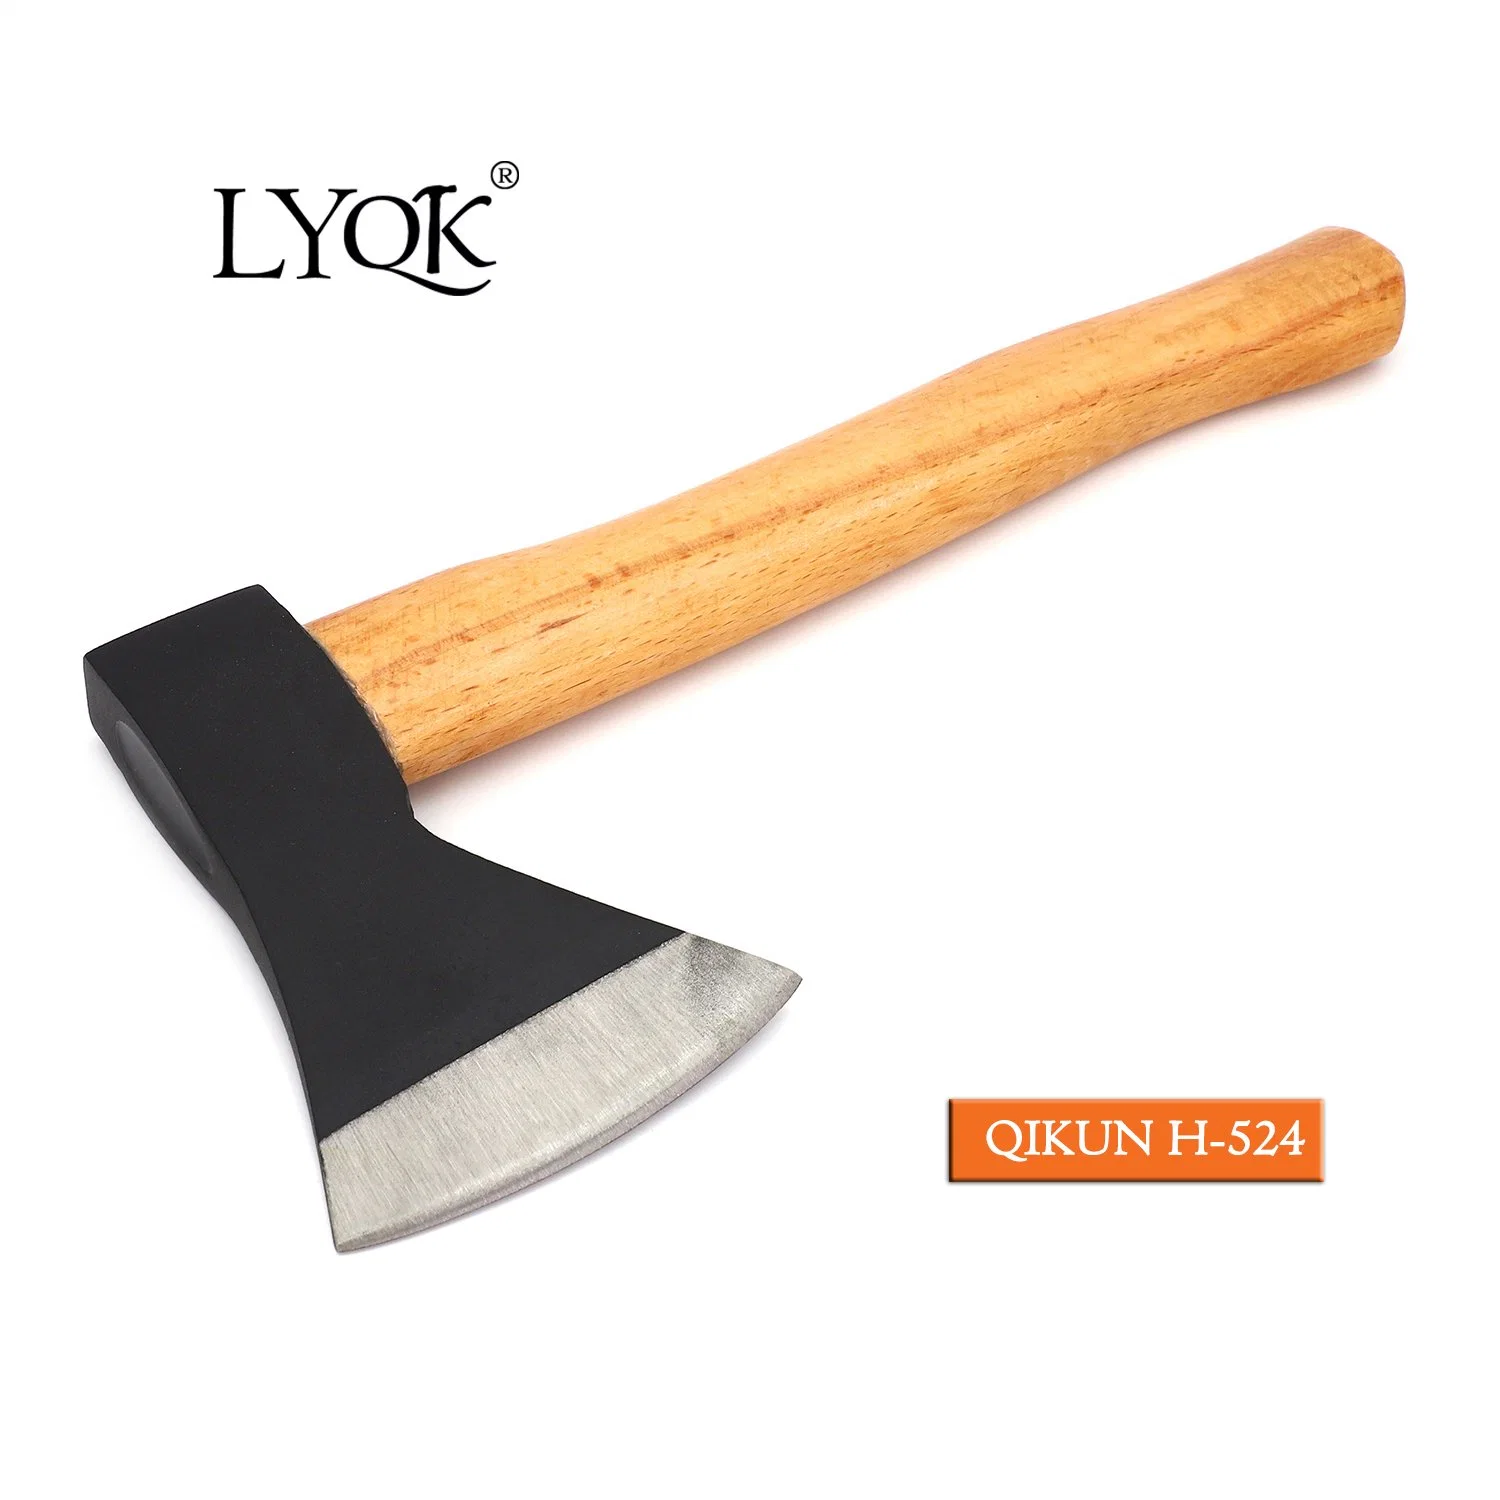 H-524 Construction Hardware Hand Tools Wooden Handle Hammer Axe